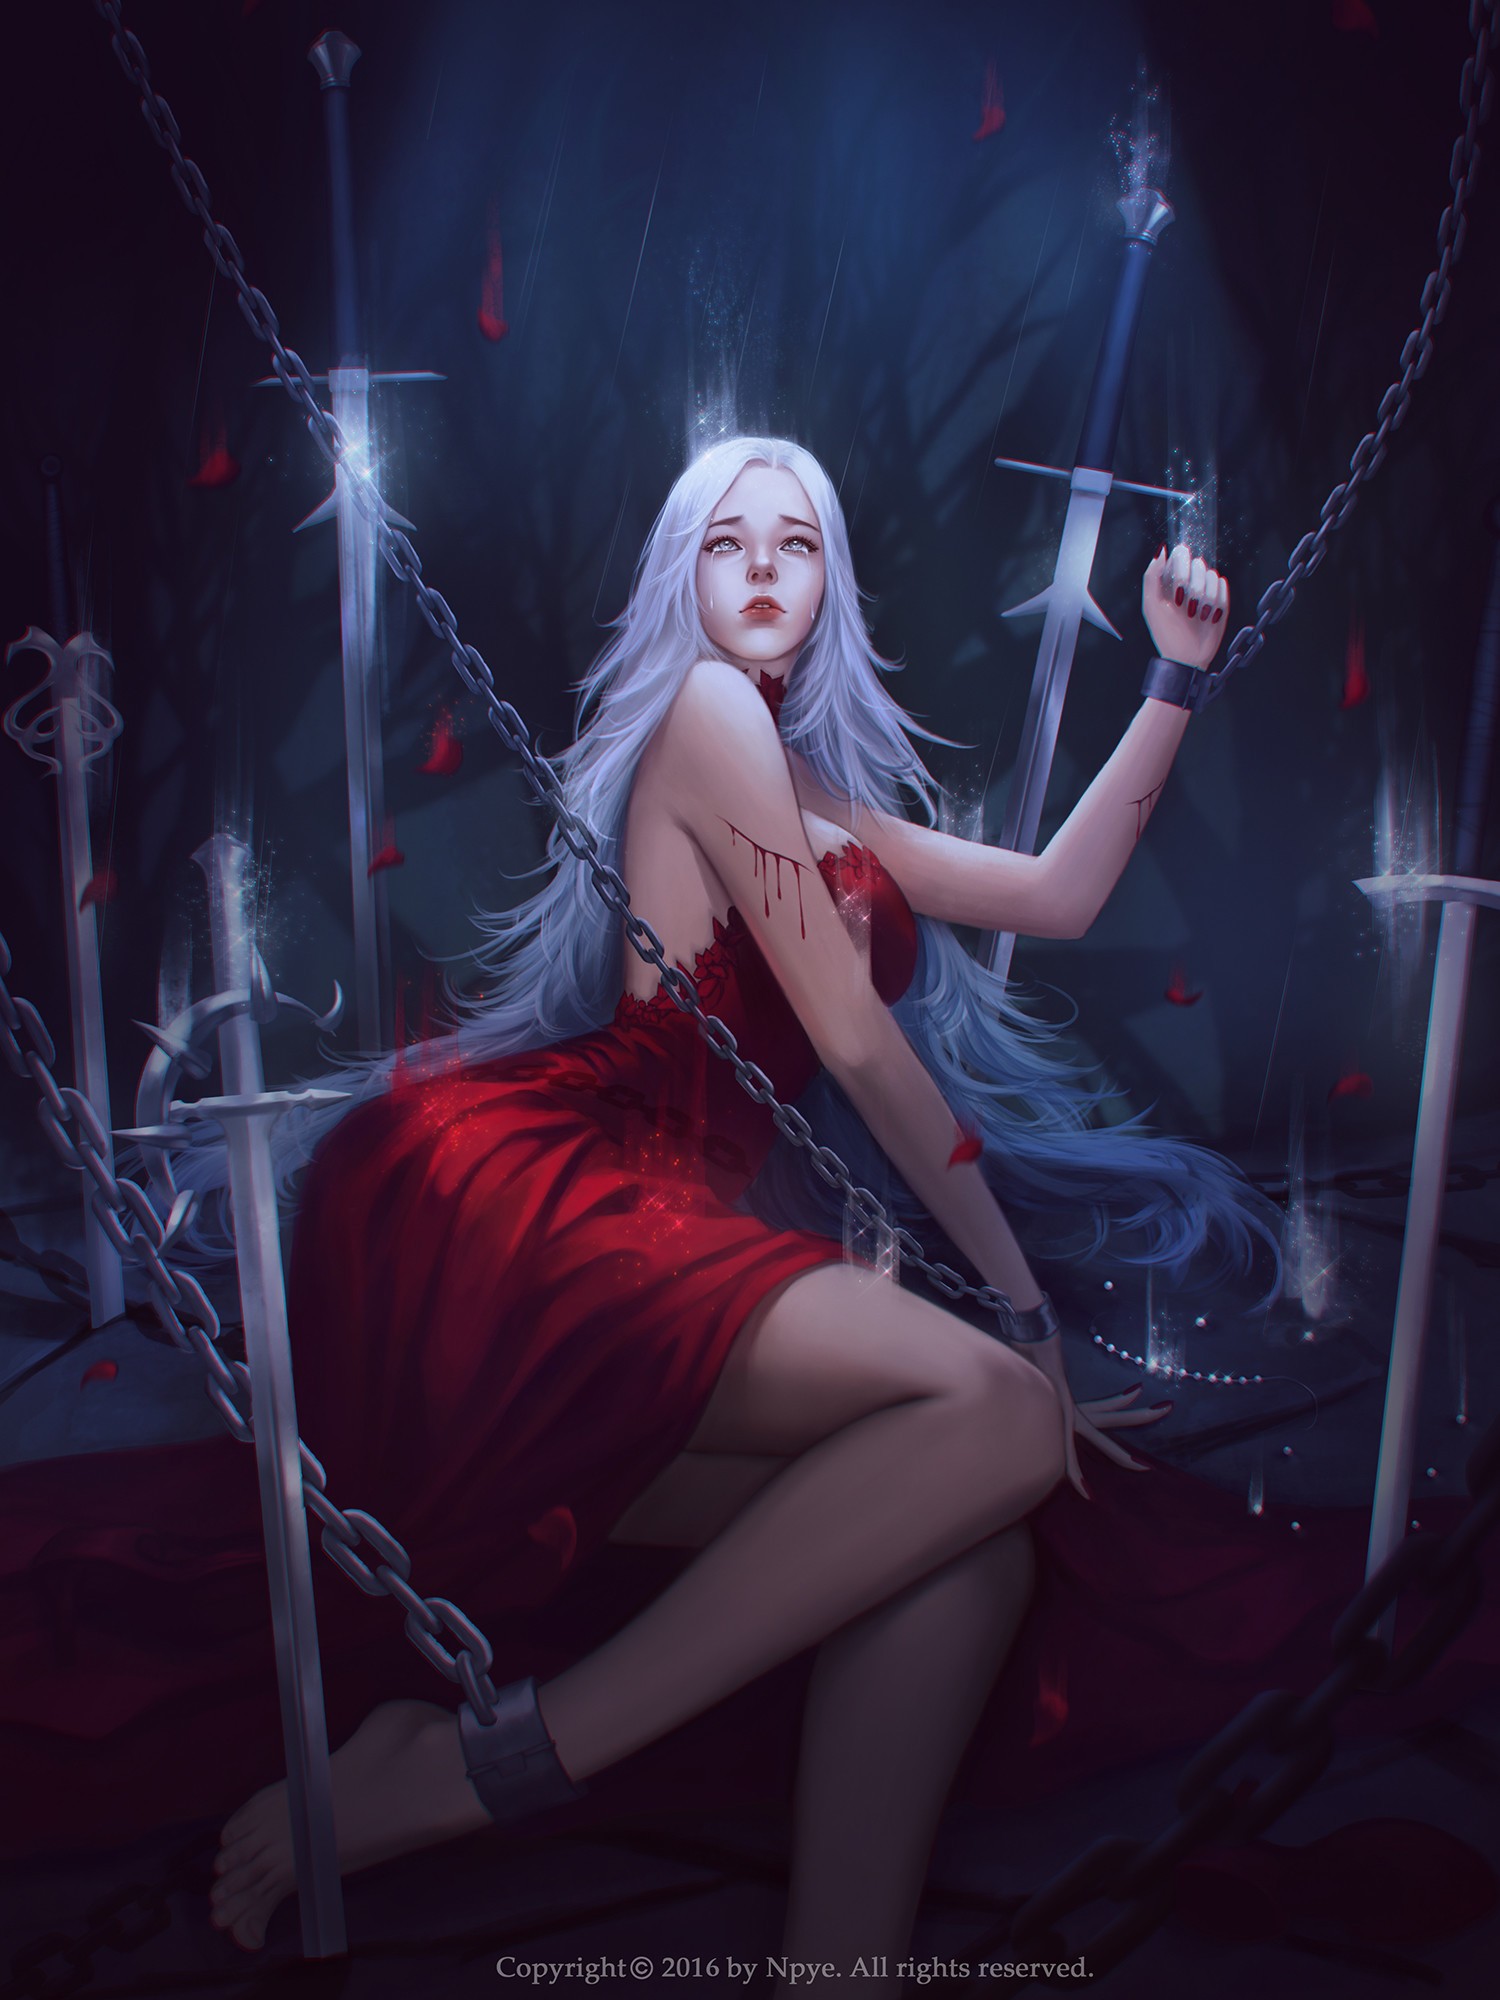 General 1500x2000 fantasy art 2016 (year) chains barefoot fantasy girl sword women watermarked blood wounds red dress dress red nails painted nails red clothing